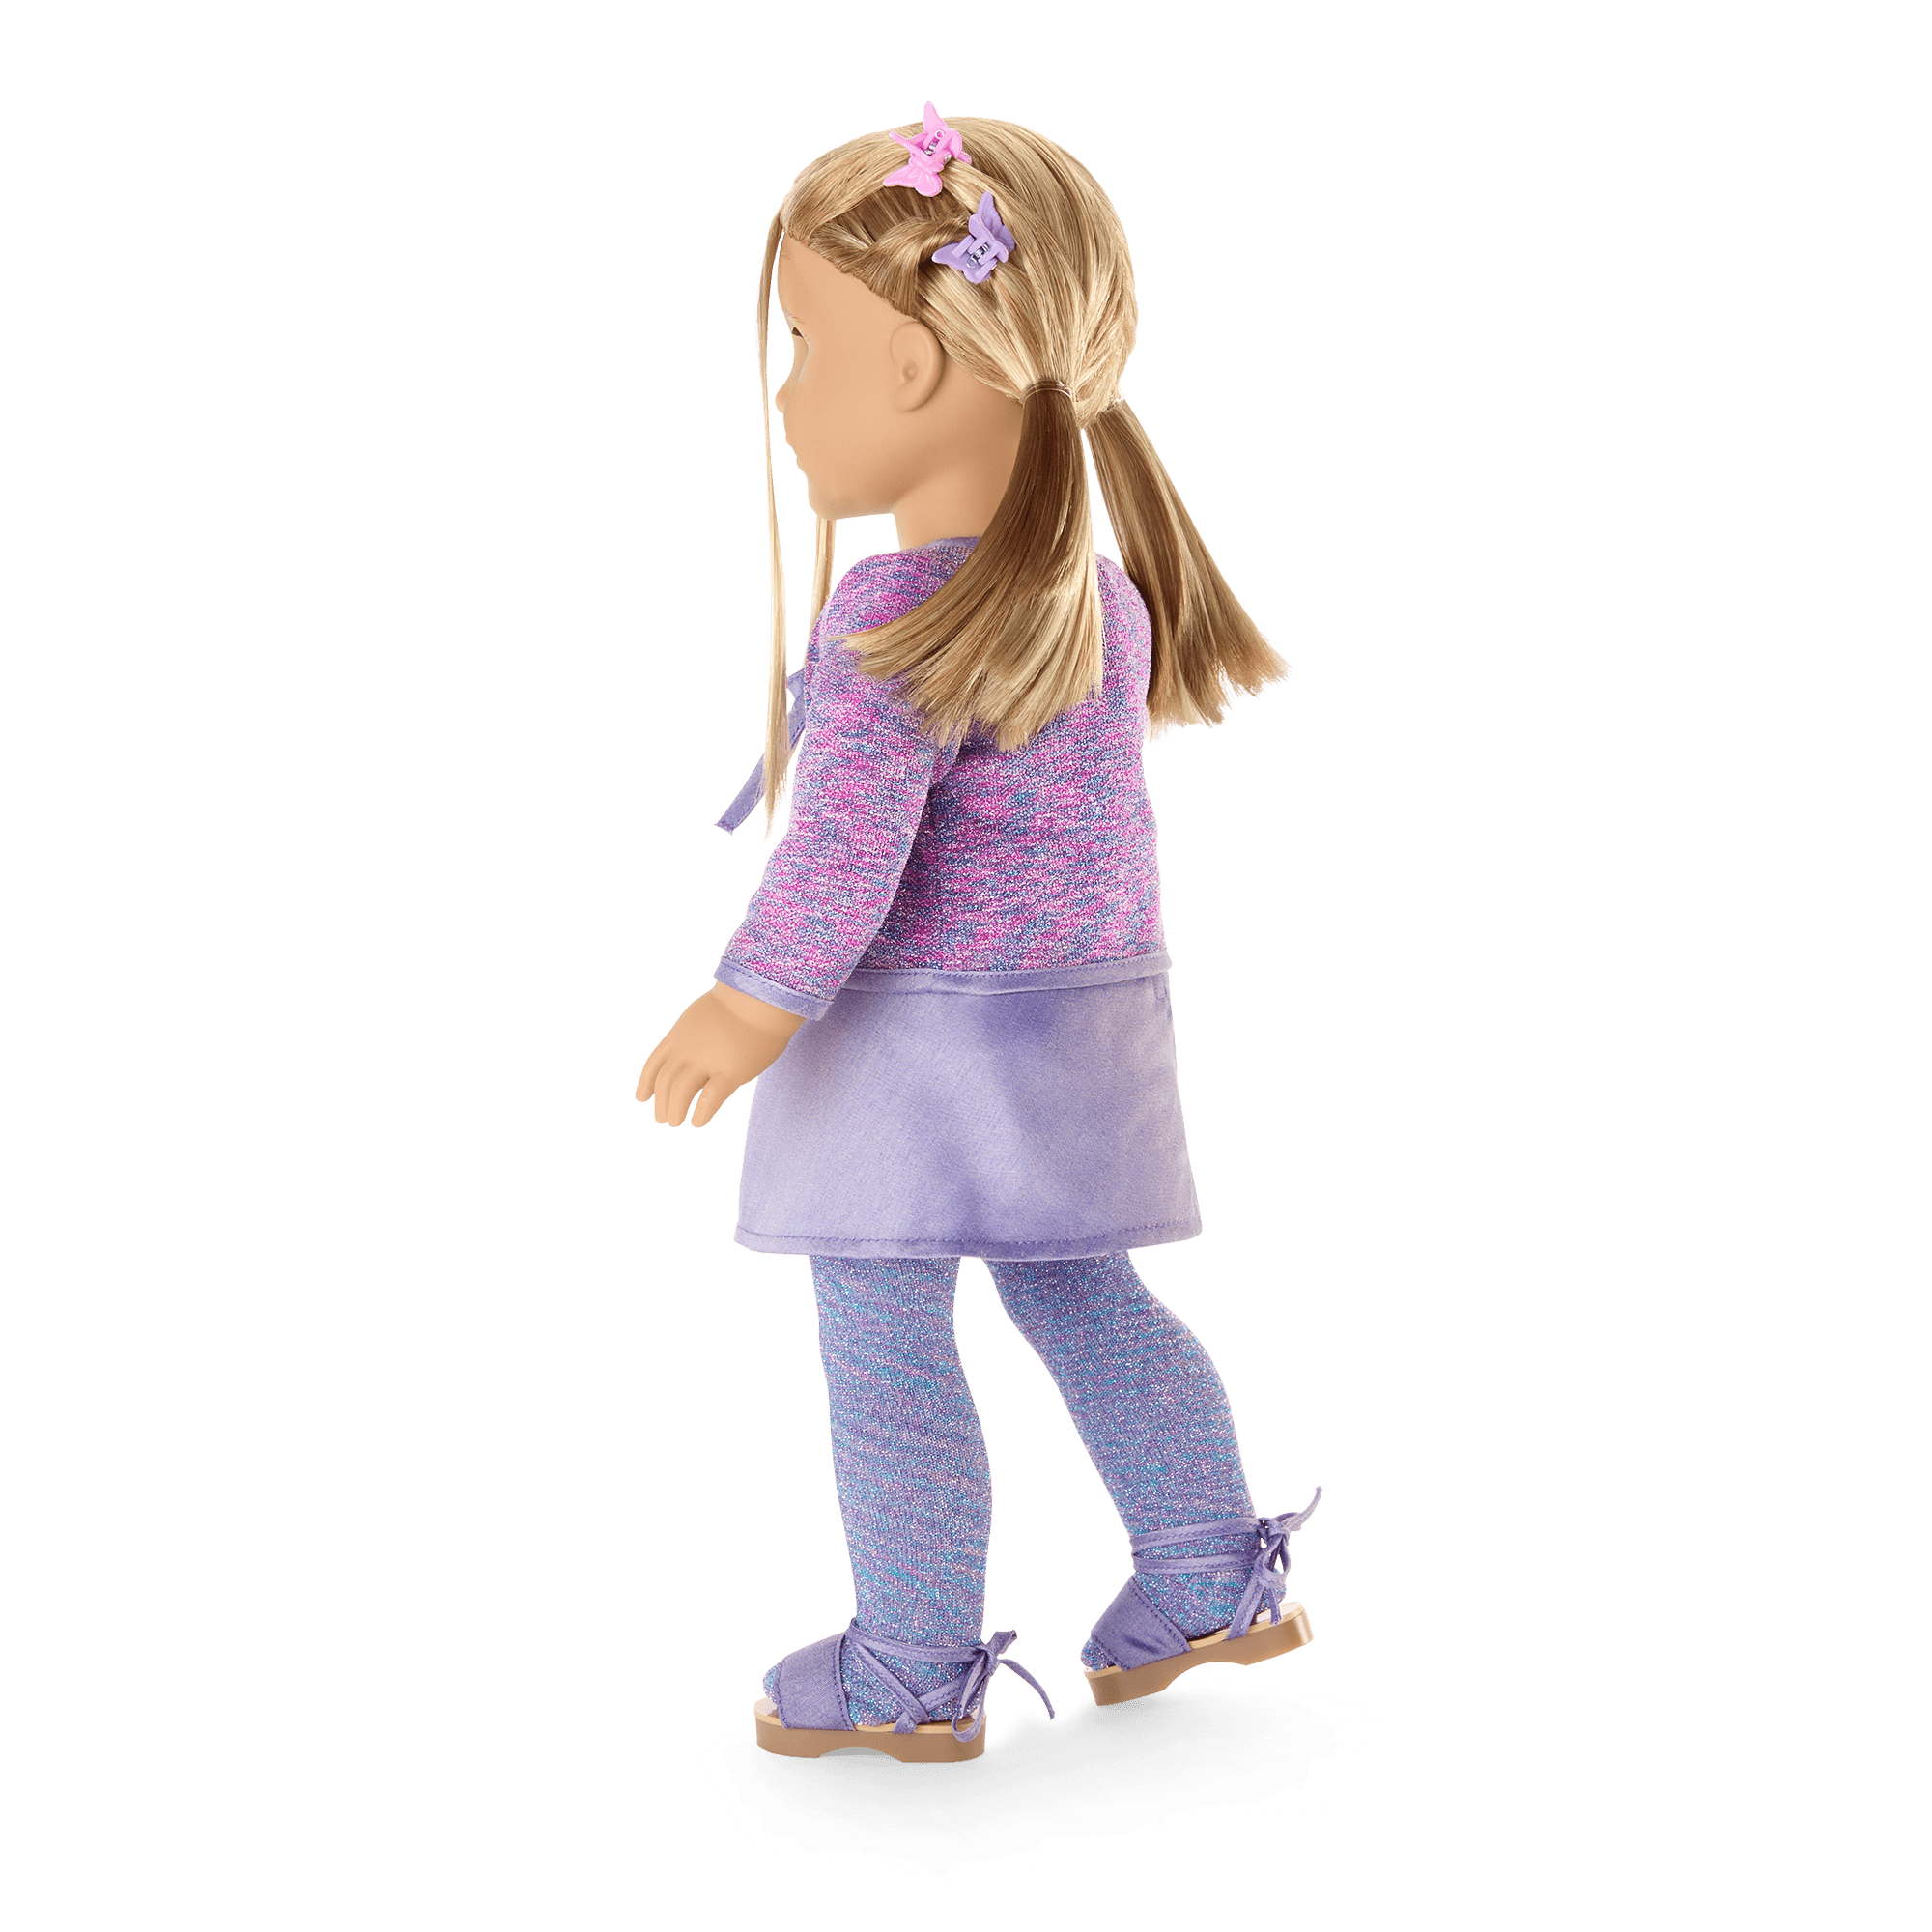 Isabel’s™ Year 2000 Outfit for 18-inch Dolls (Historical Characters)